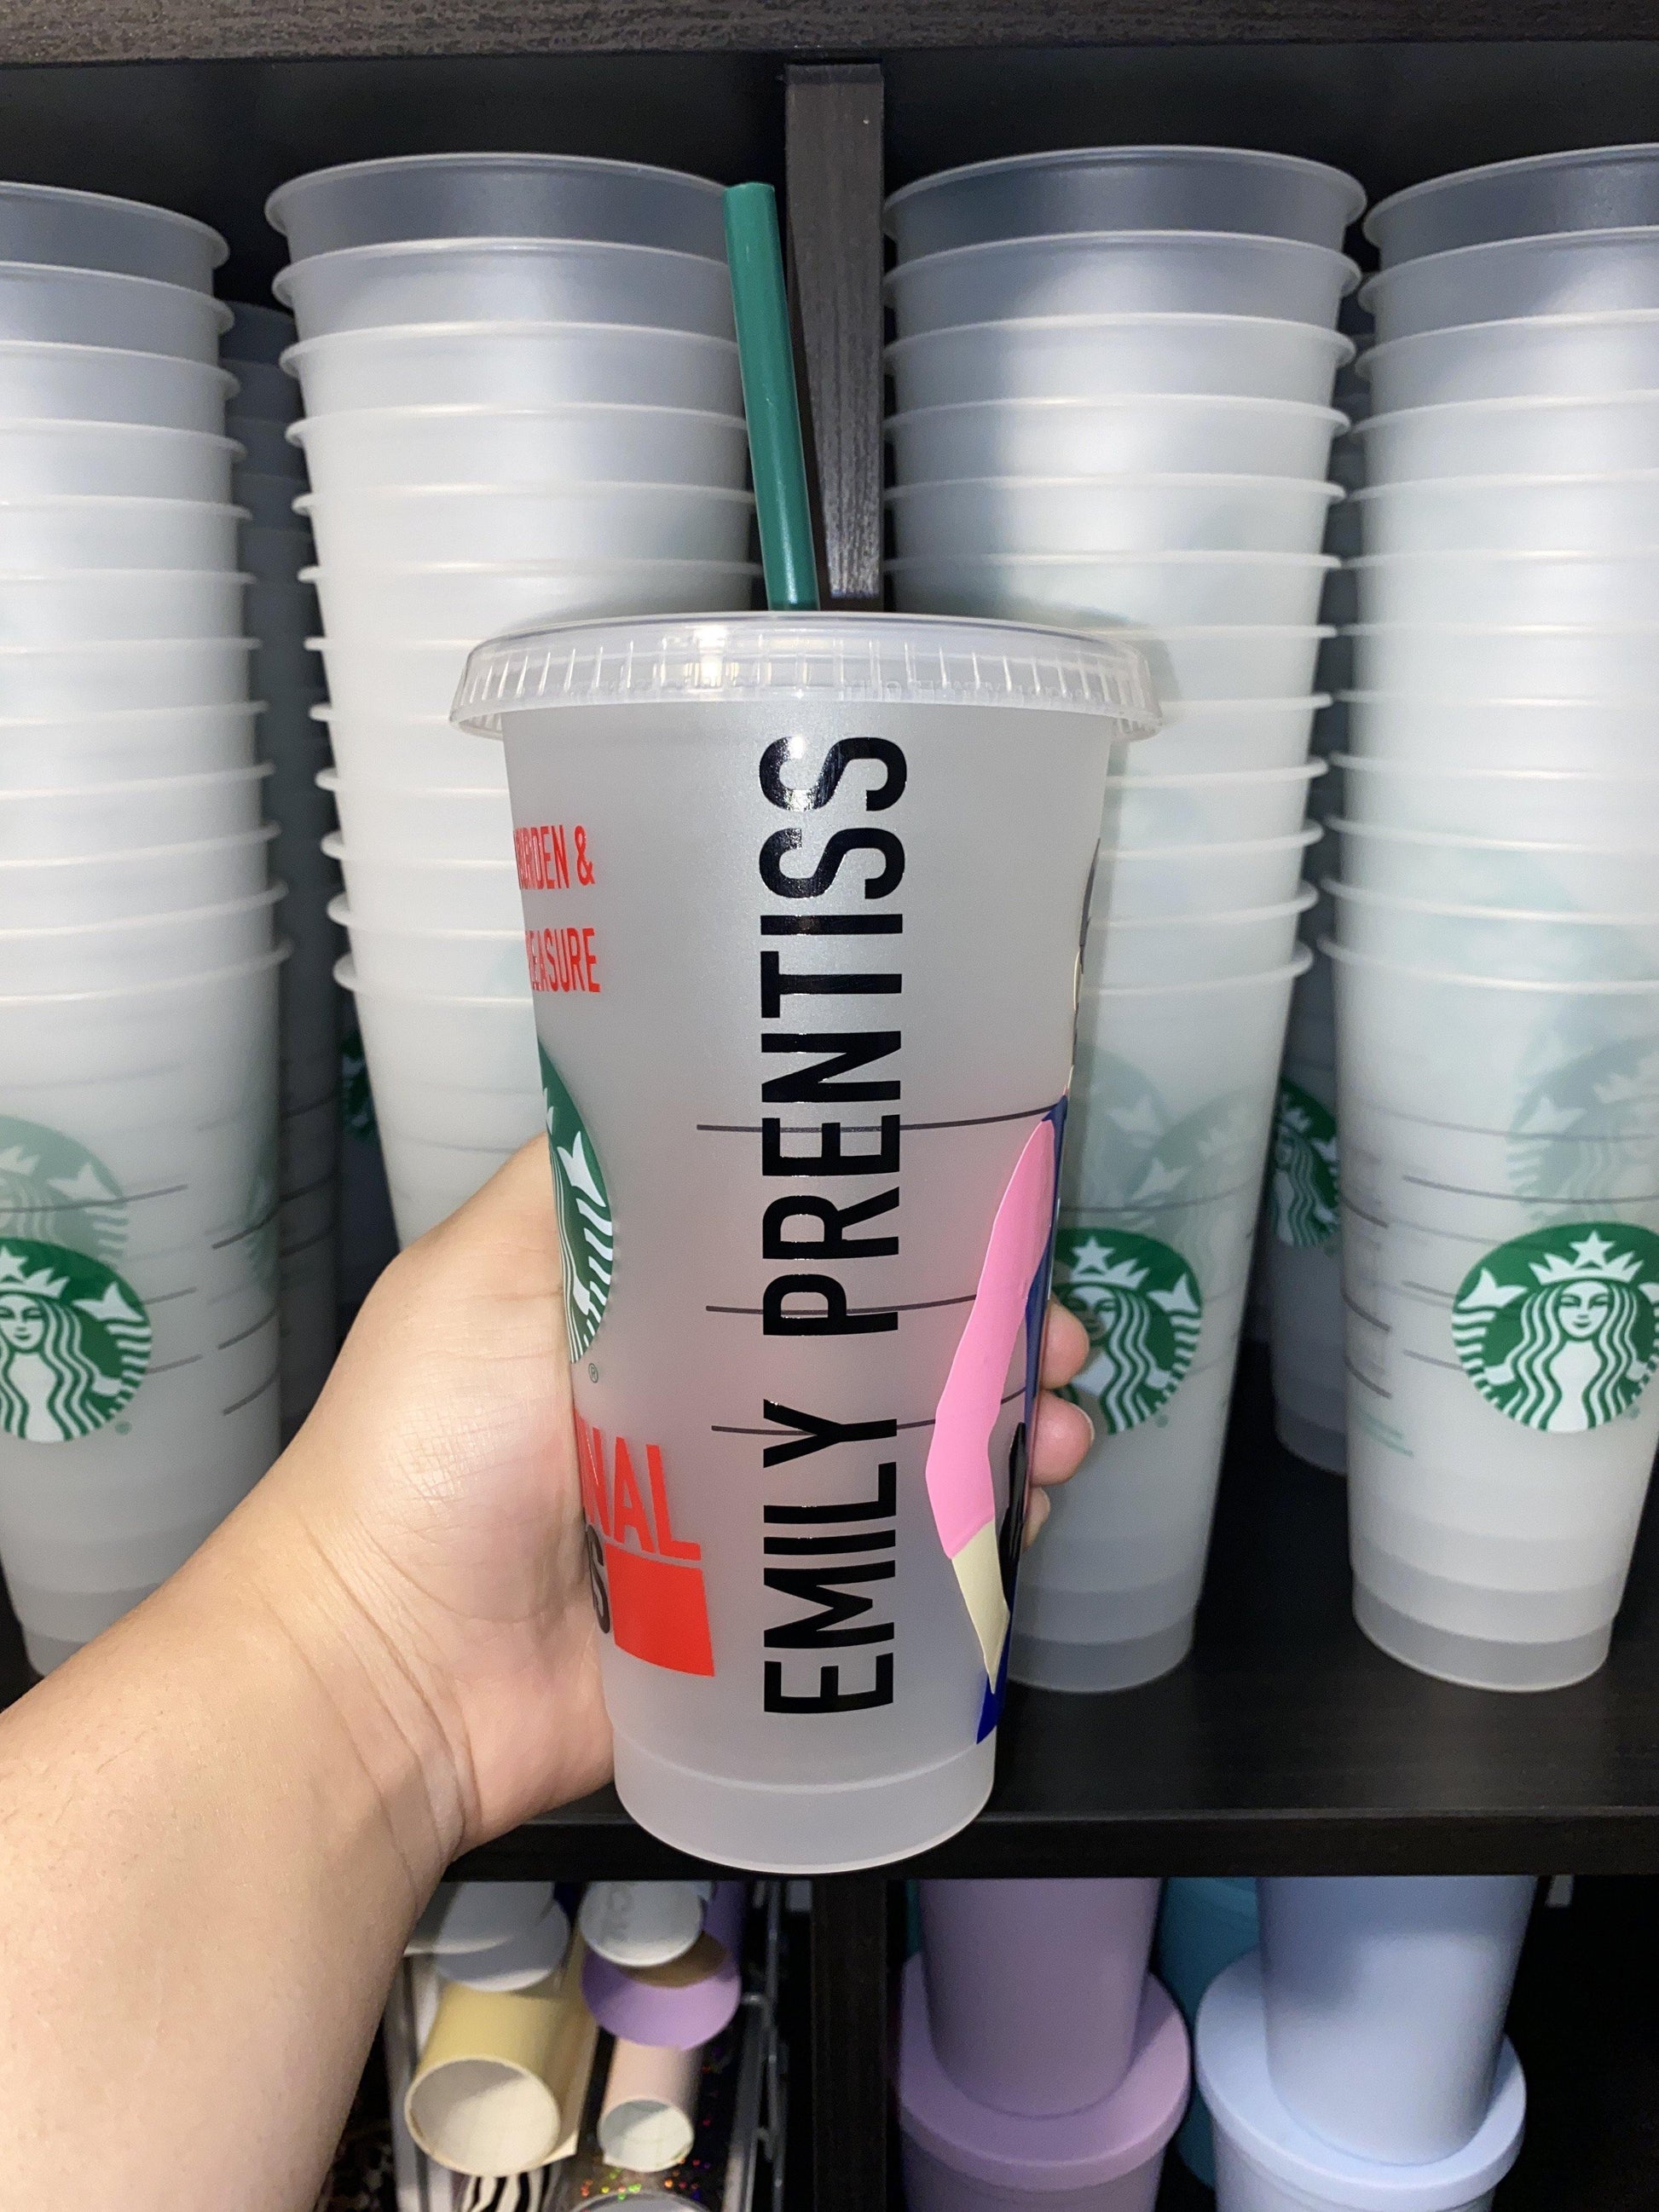 Emily Prentiss Criminal Minds Starbucks Frosted Cup. Custom Starbucks Hot and Cold cups. Choose from over 100 designs and colour combinations or customize your own. Toronto, ON, Canada. Ship Worldwide.